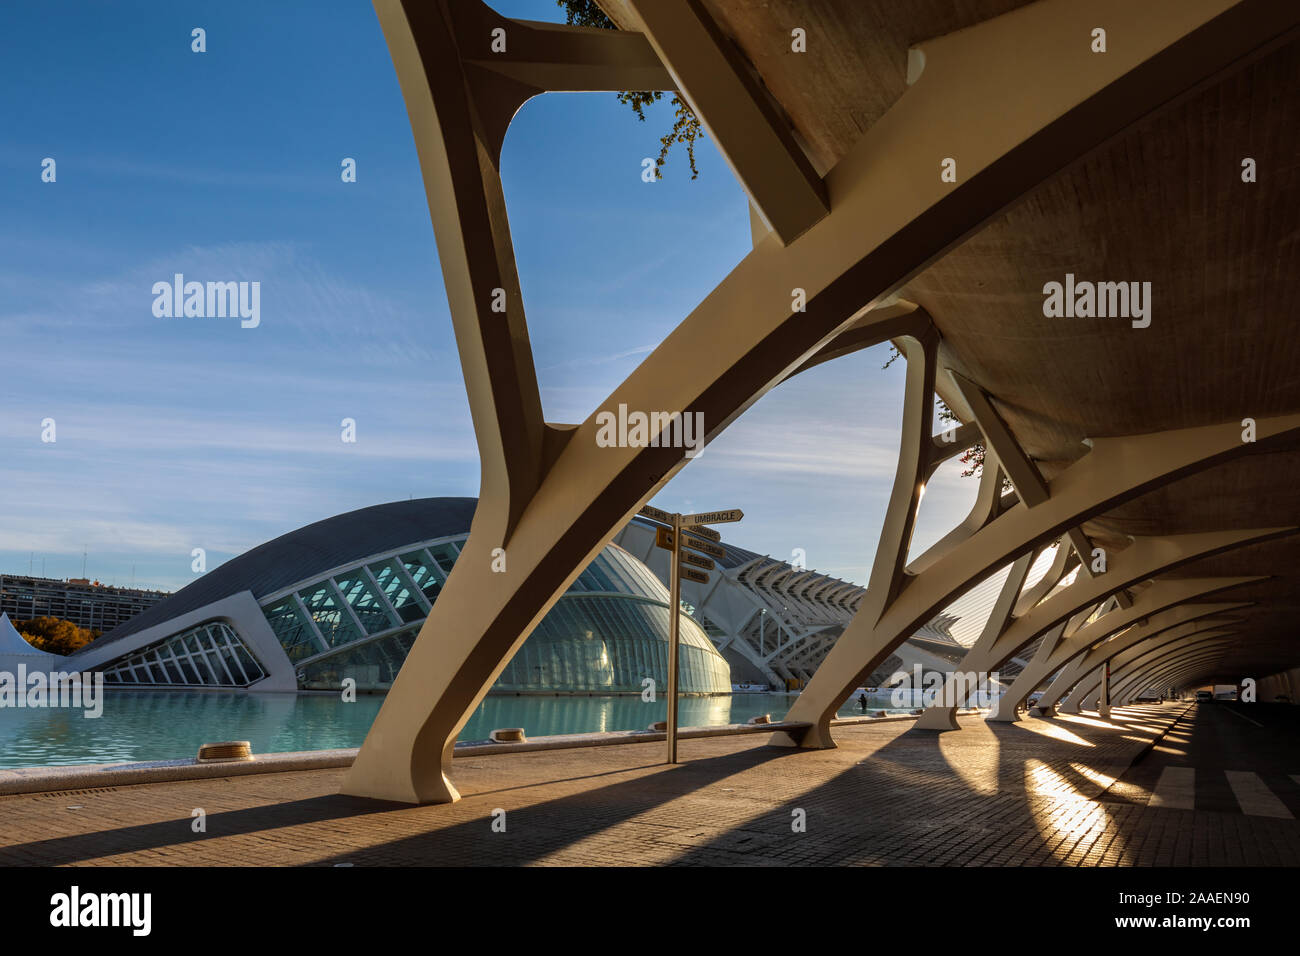 City of Arts and Sciences in the early morning, designed by Calatrava, Valencia, Spain Stock Photo